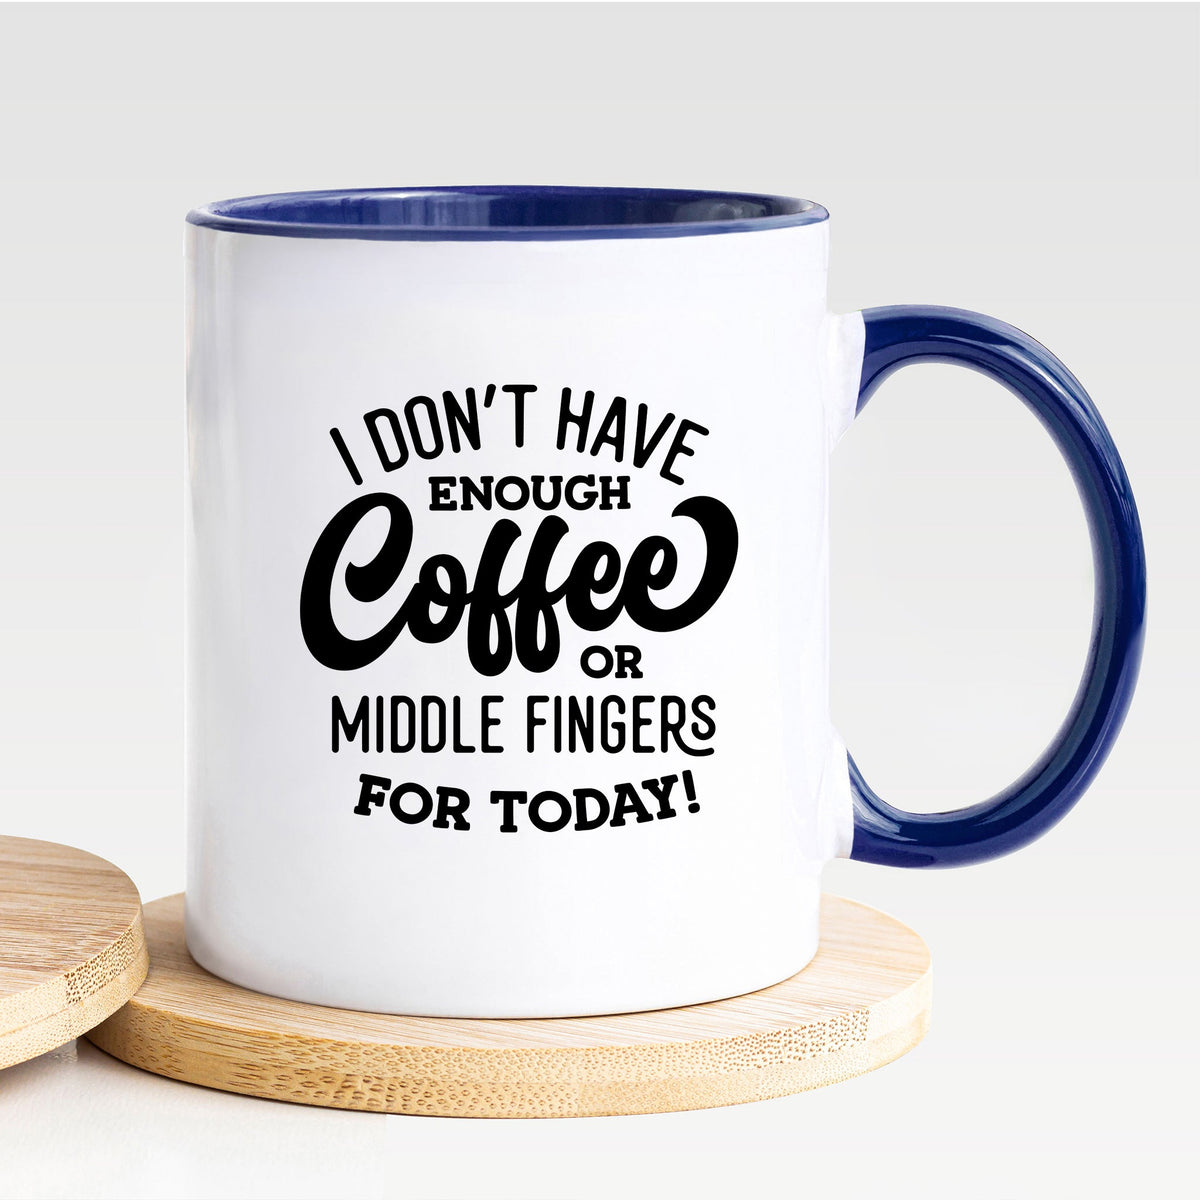 I Don't Have Enough Coffee Or Middle Fingers For Today - Mug